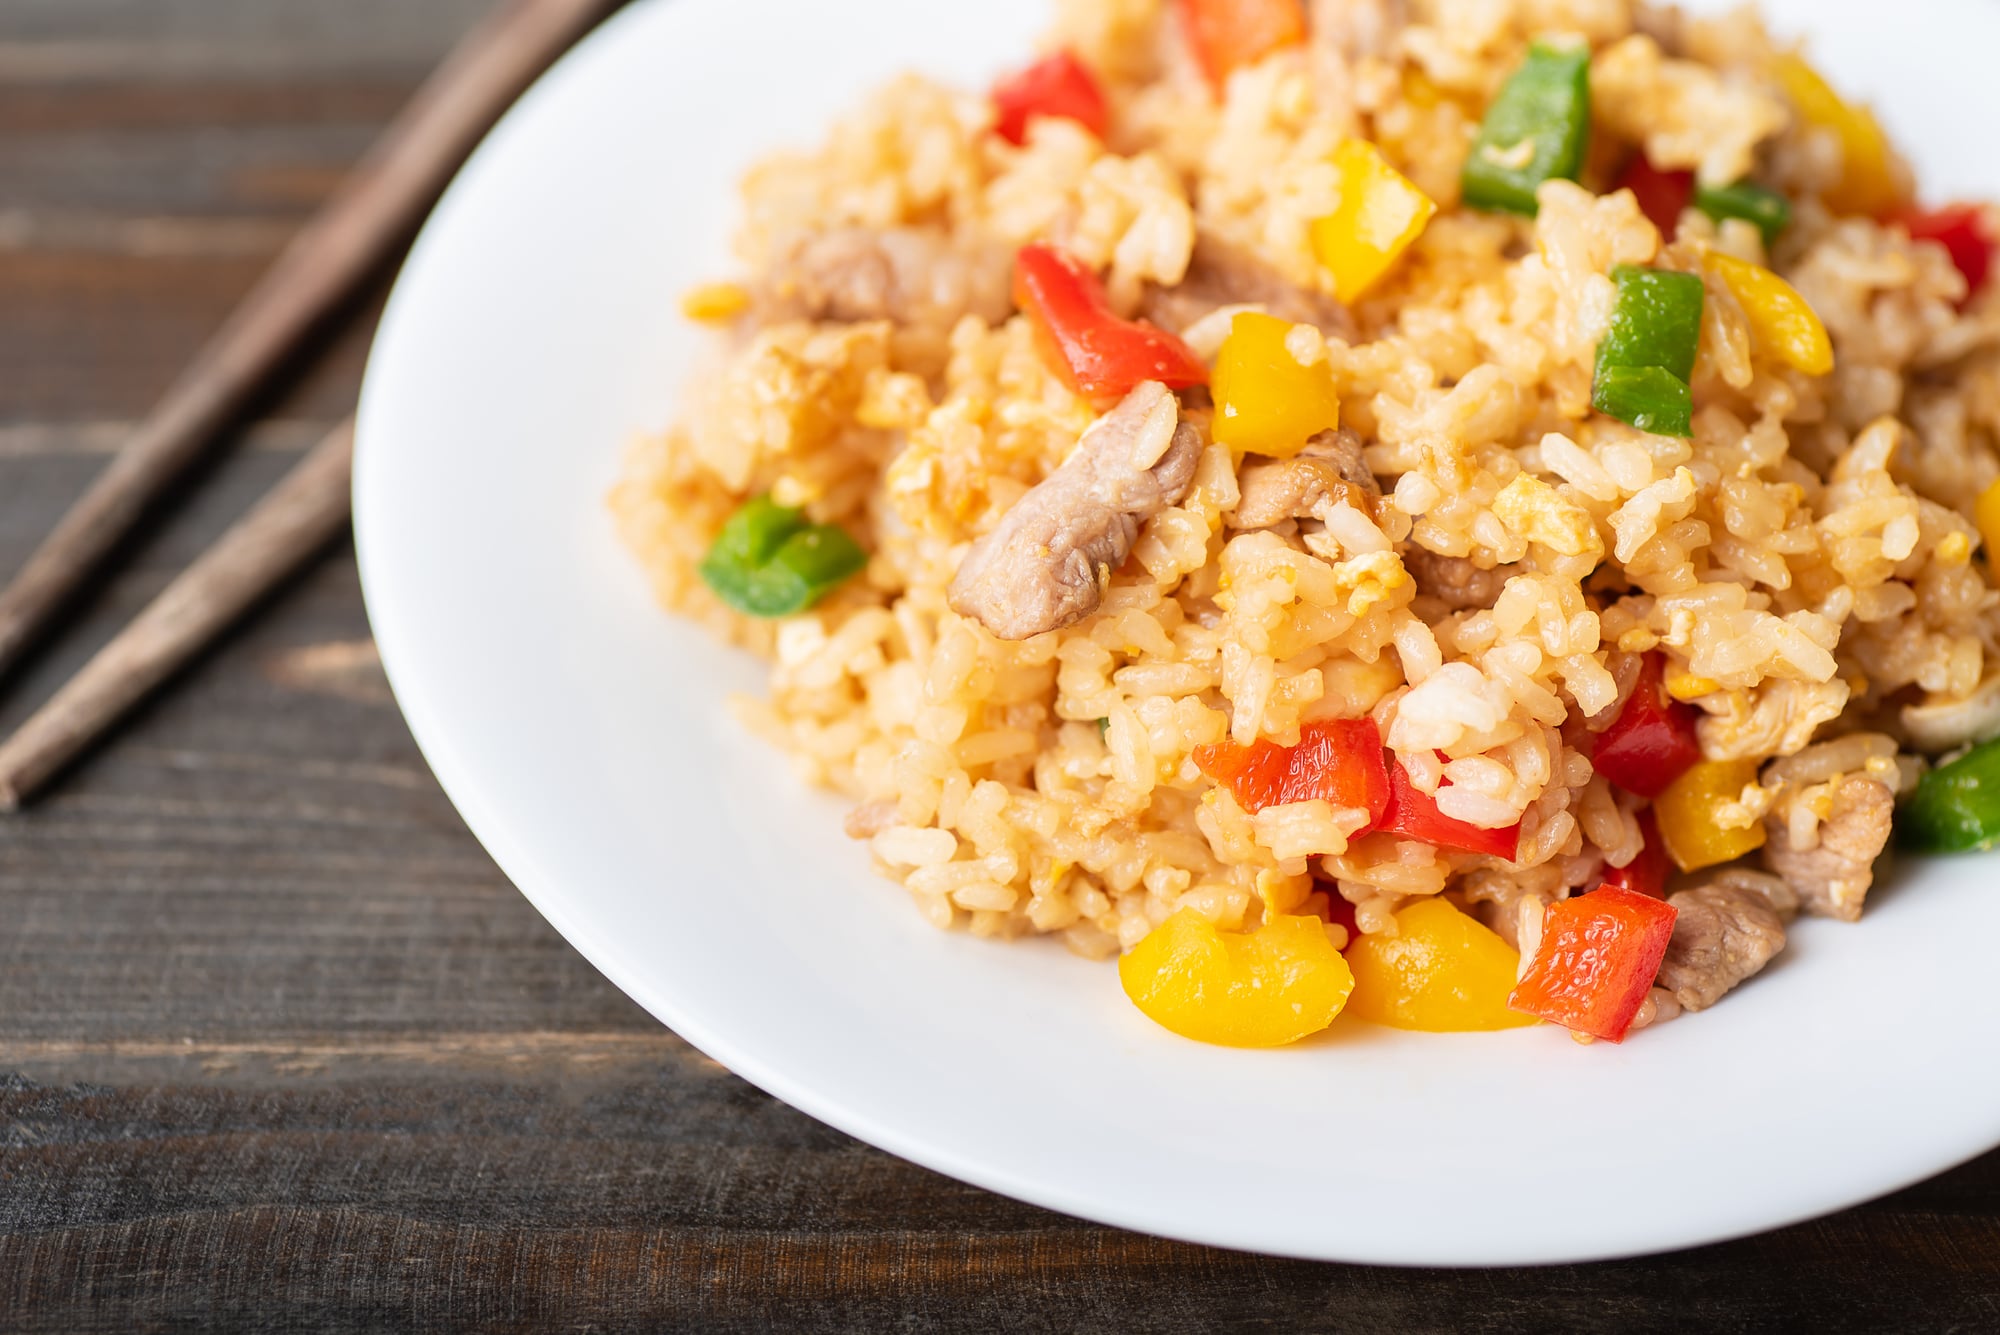 Fried rice with vegetables and pork, Thai cuisine